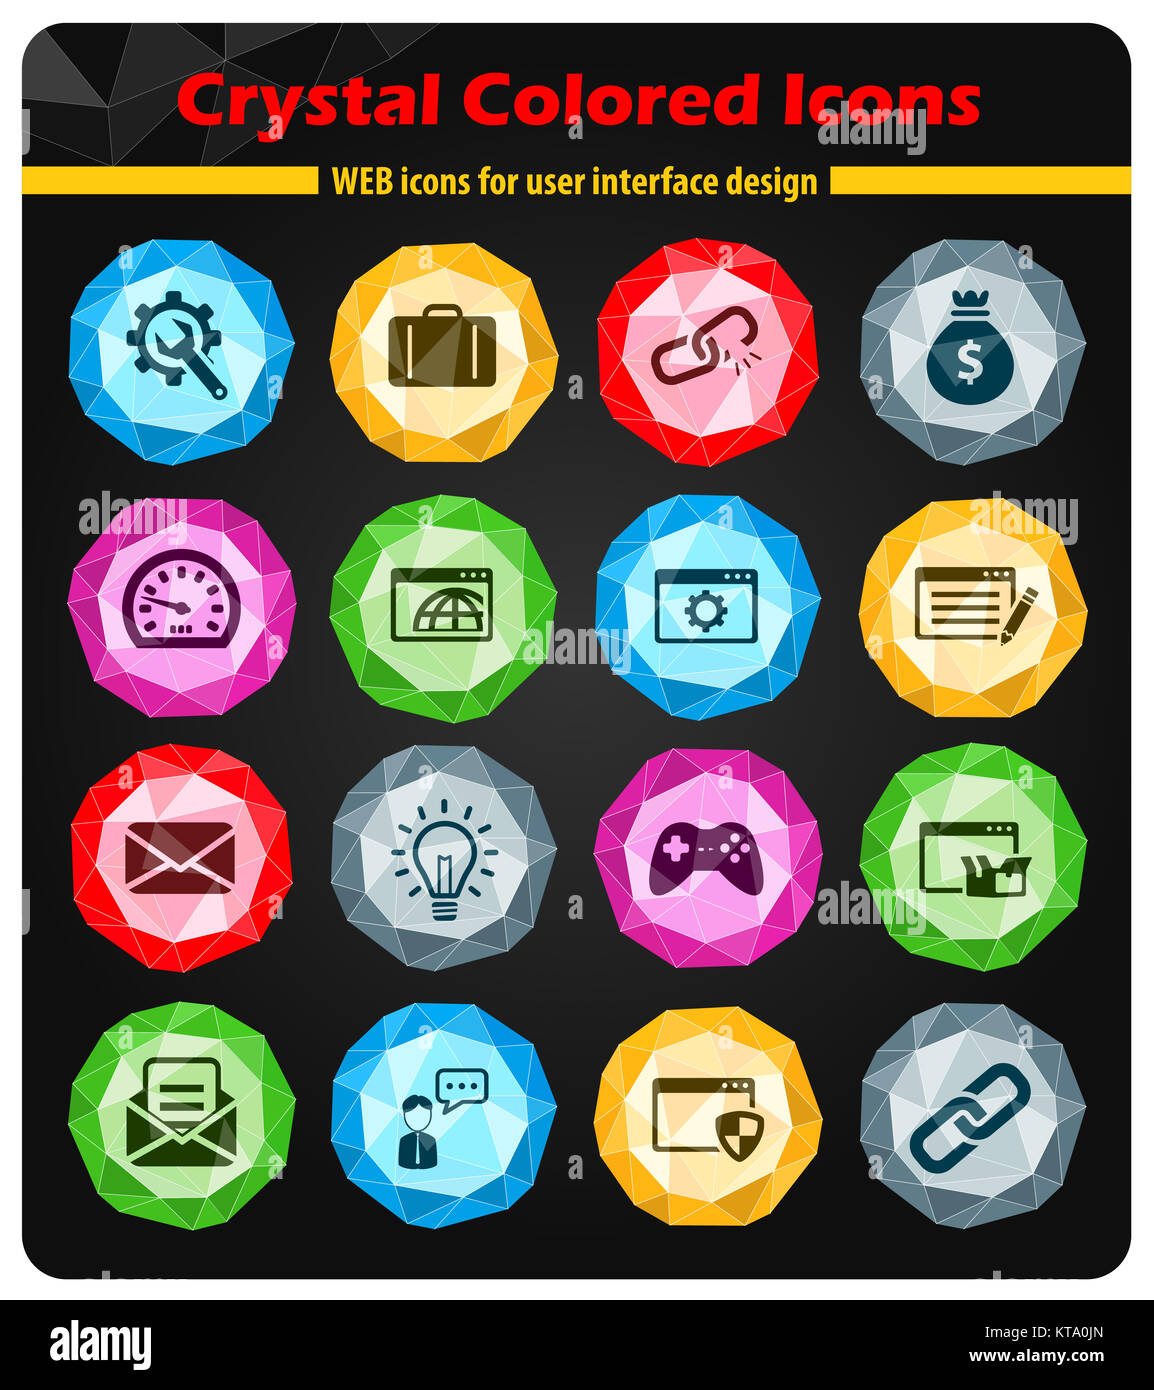 SEO and development simply icons Stock Photo